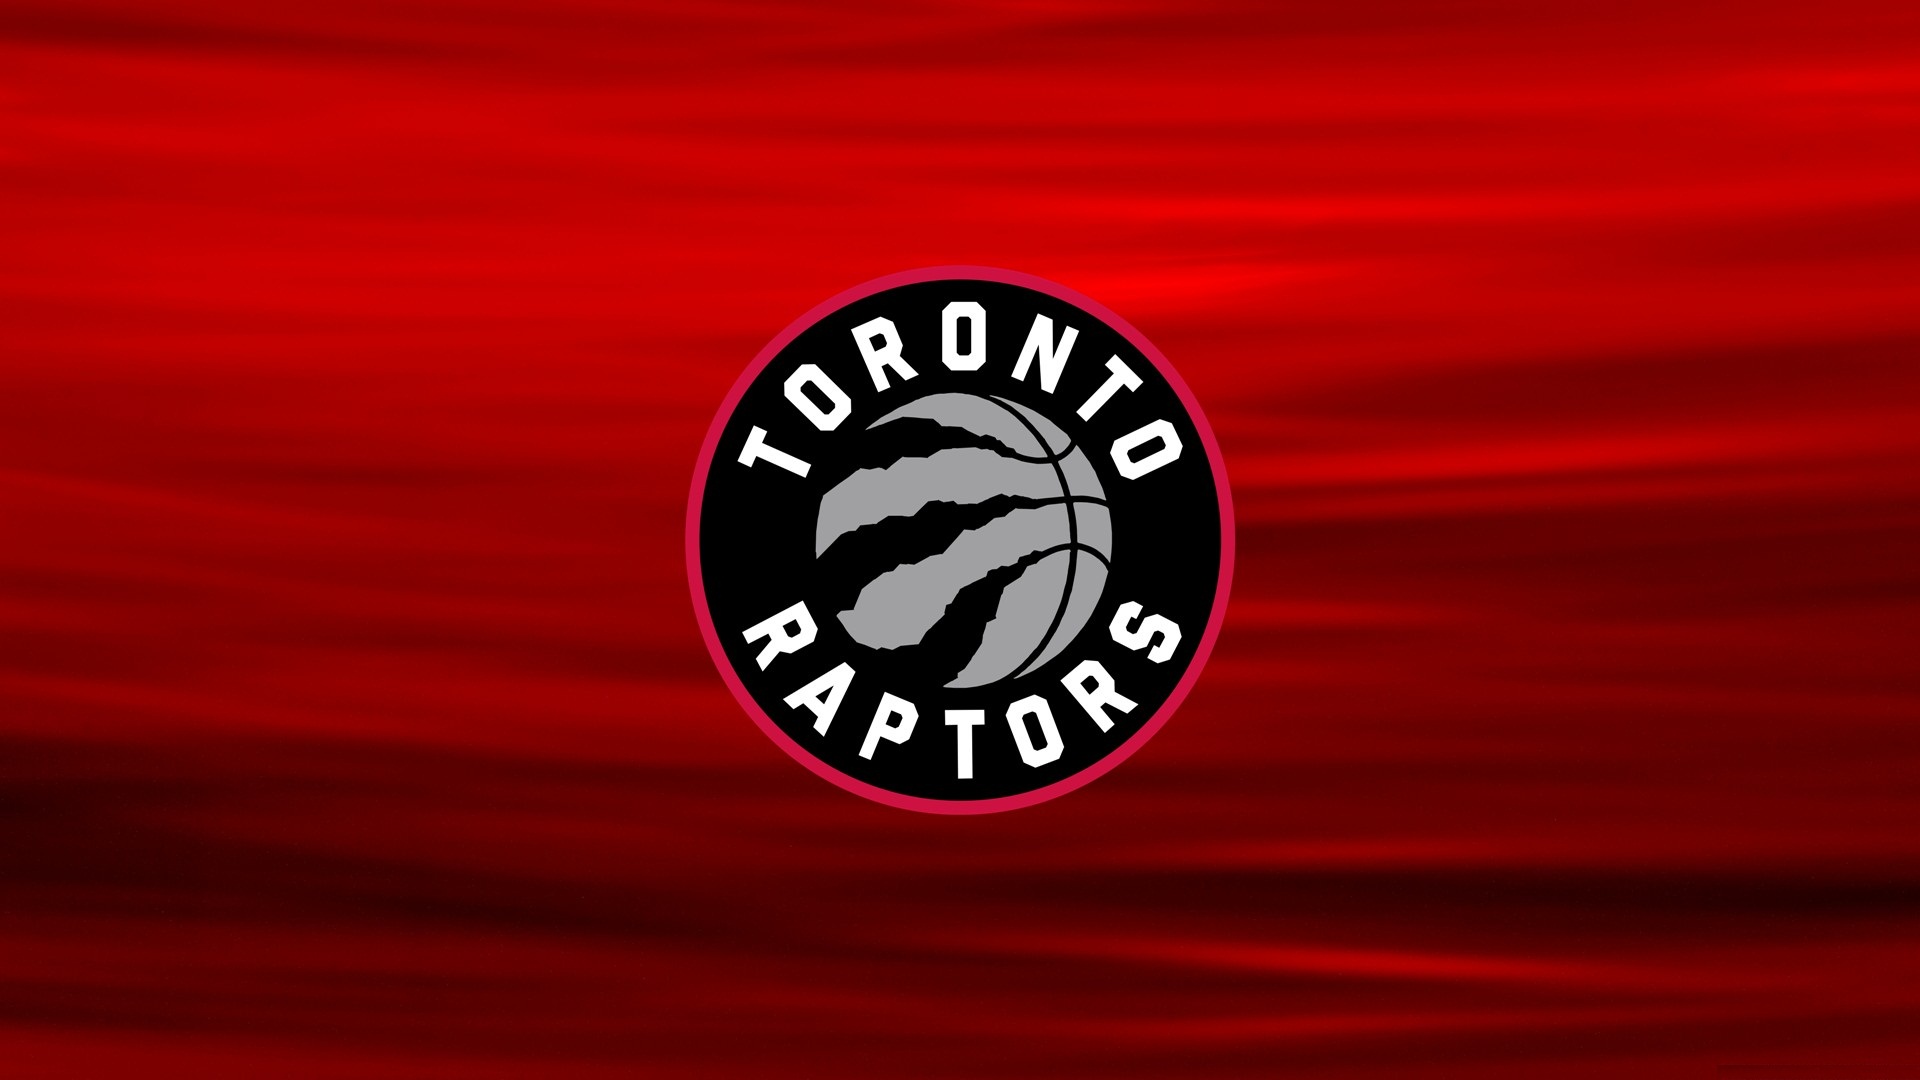 HD Raptors Basketball Wallpapers with image dimensions 1920x1080 pixel. You can make this wallpaper for your Desktop Computer Backgrounds, Windows or Mac Screensavers, iPhone Lock screen, Tablet or Android and another Mobile Phone device